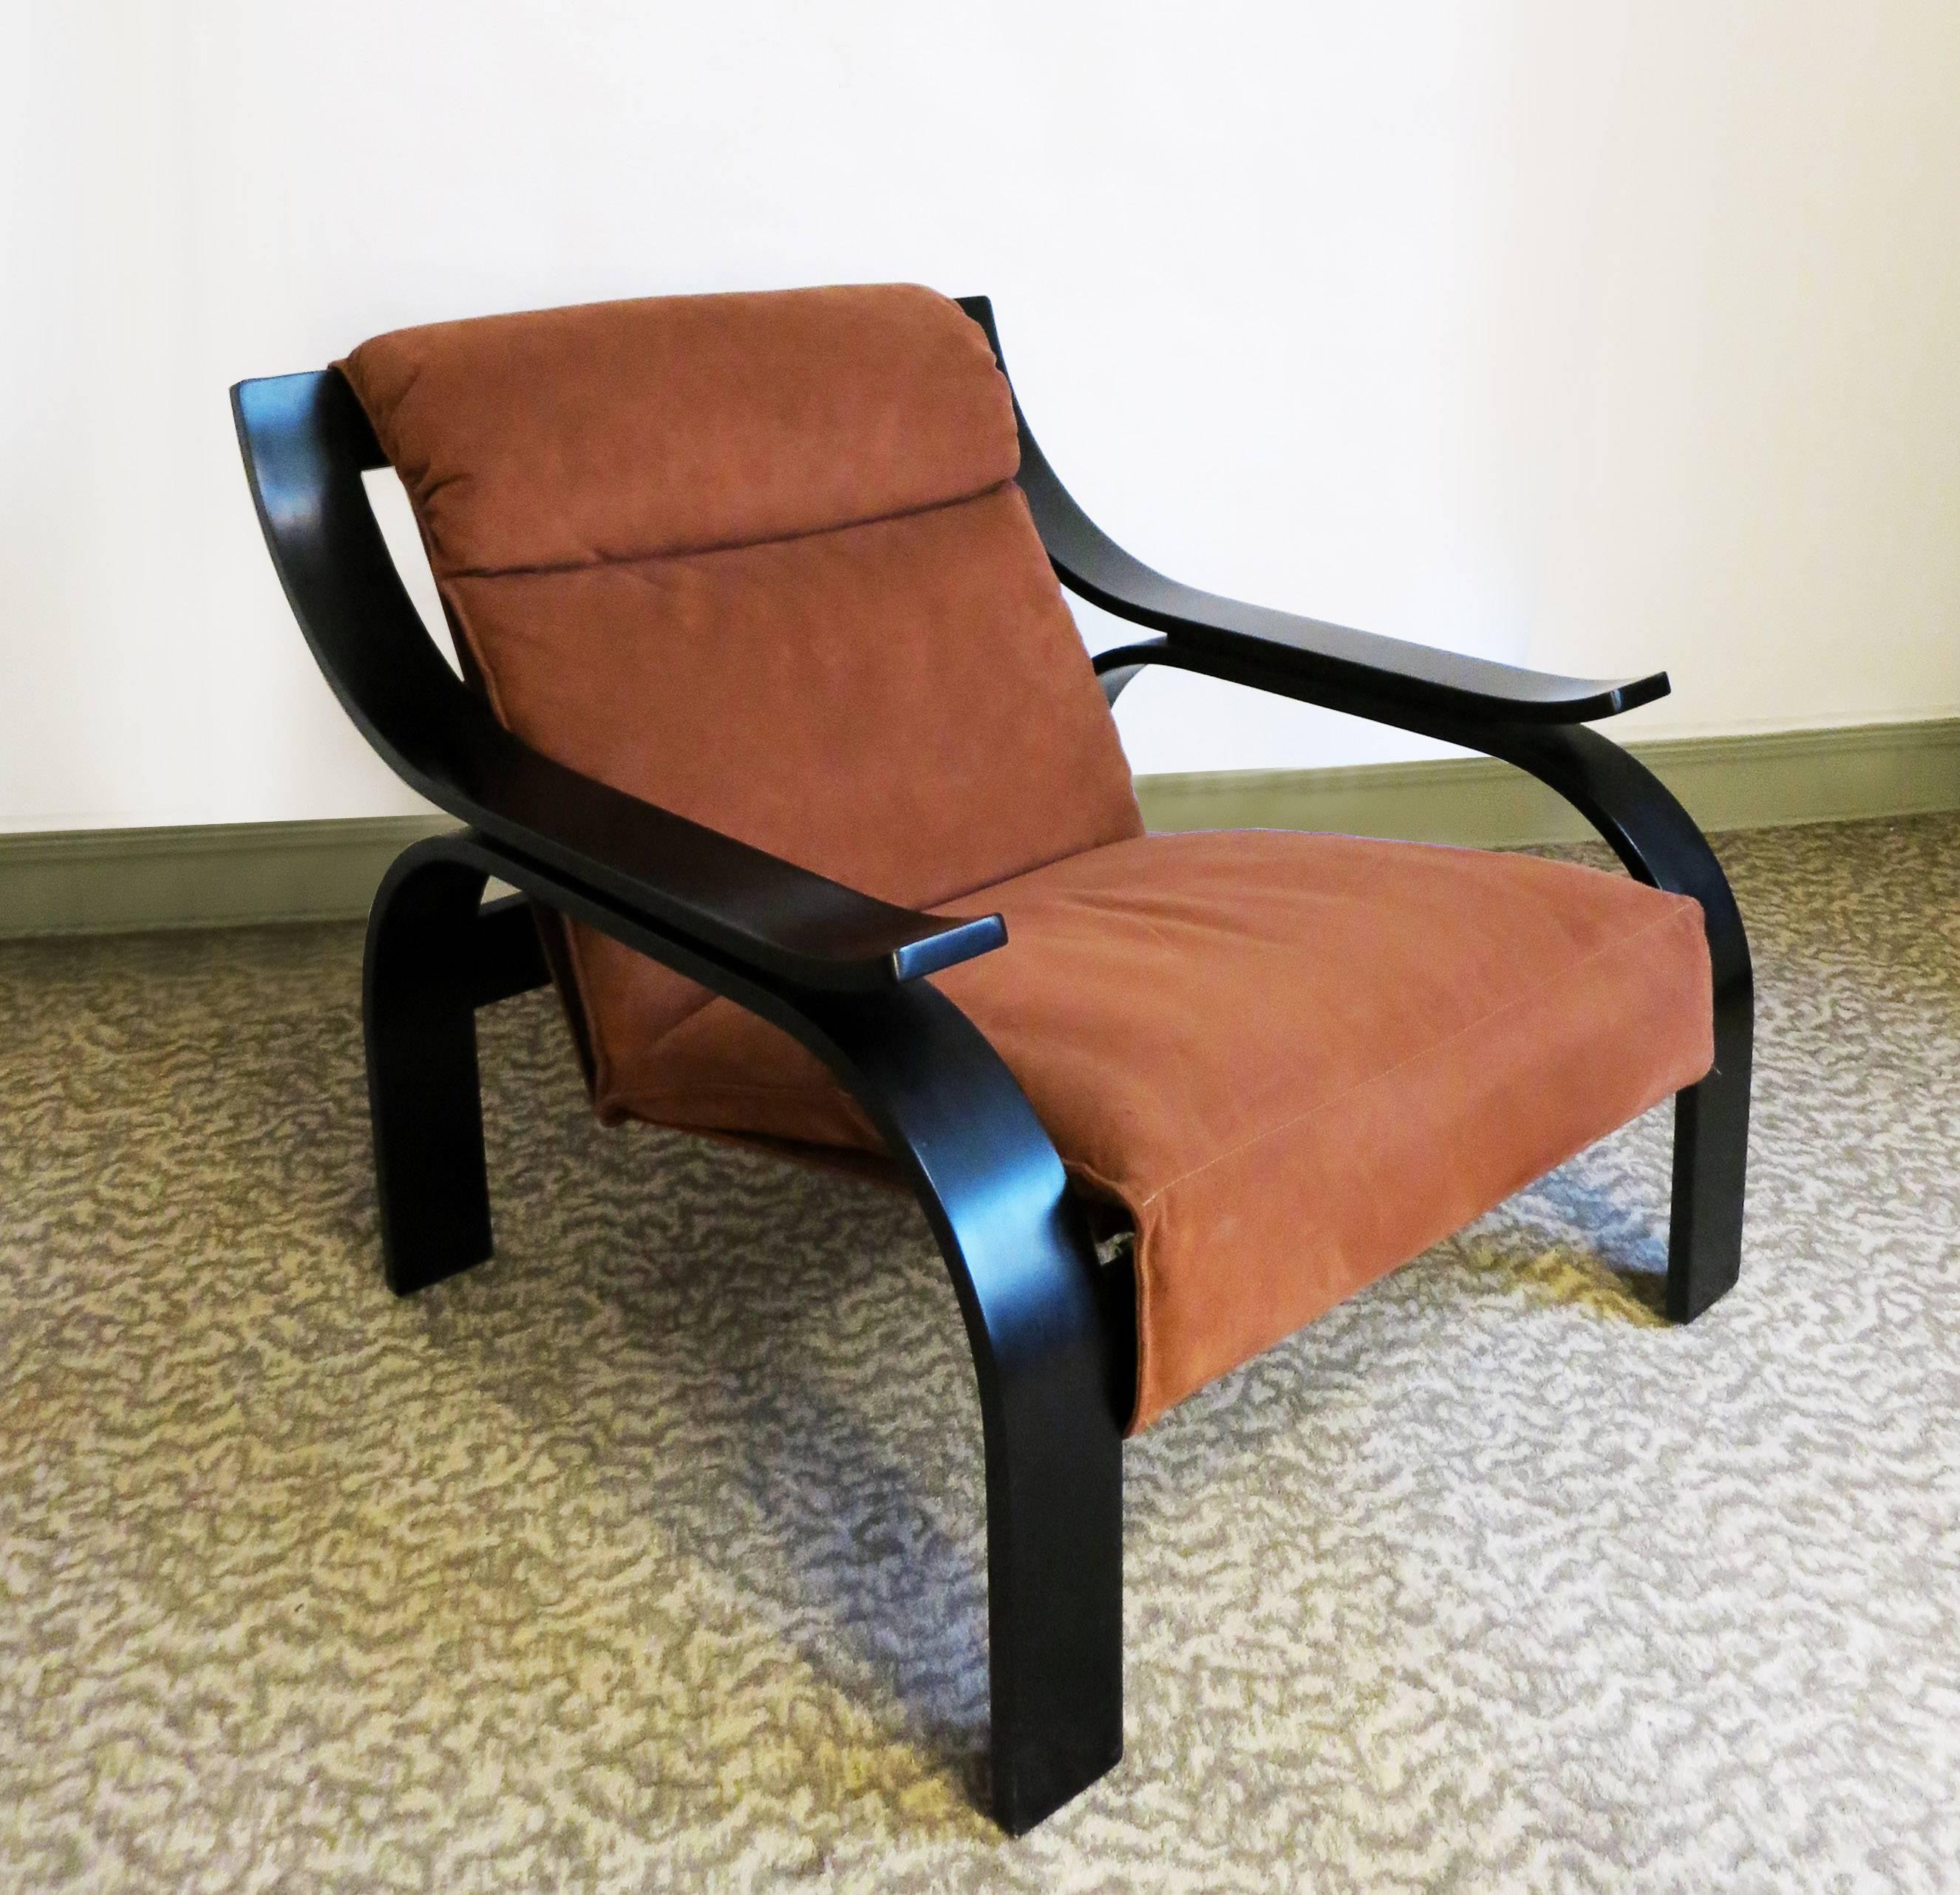 Armchair by Marco Zanusso from the19 60s.
Ebonized wood and original alcantara upholstery.